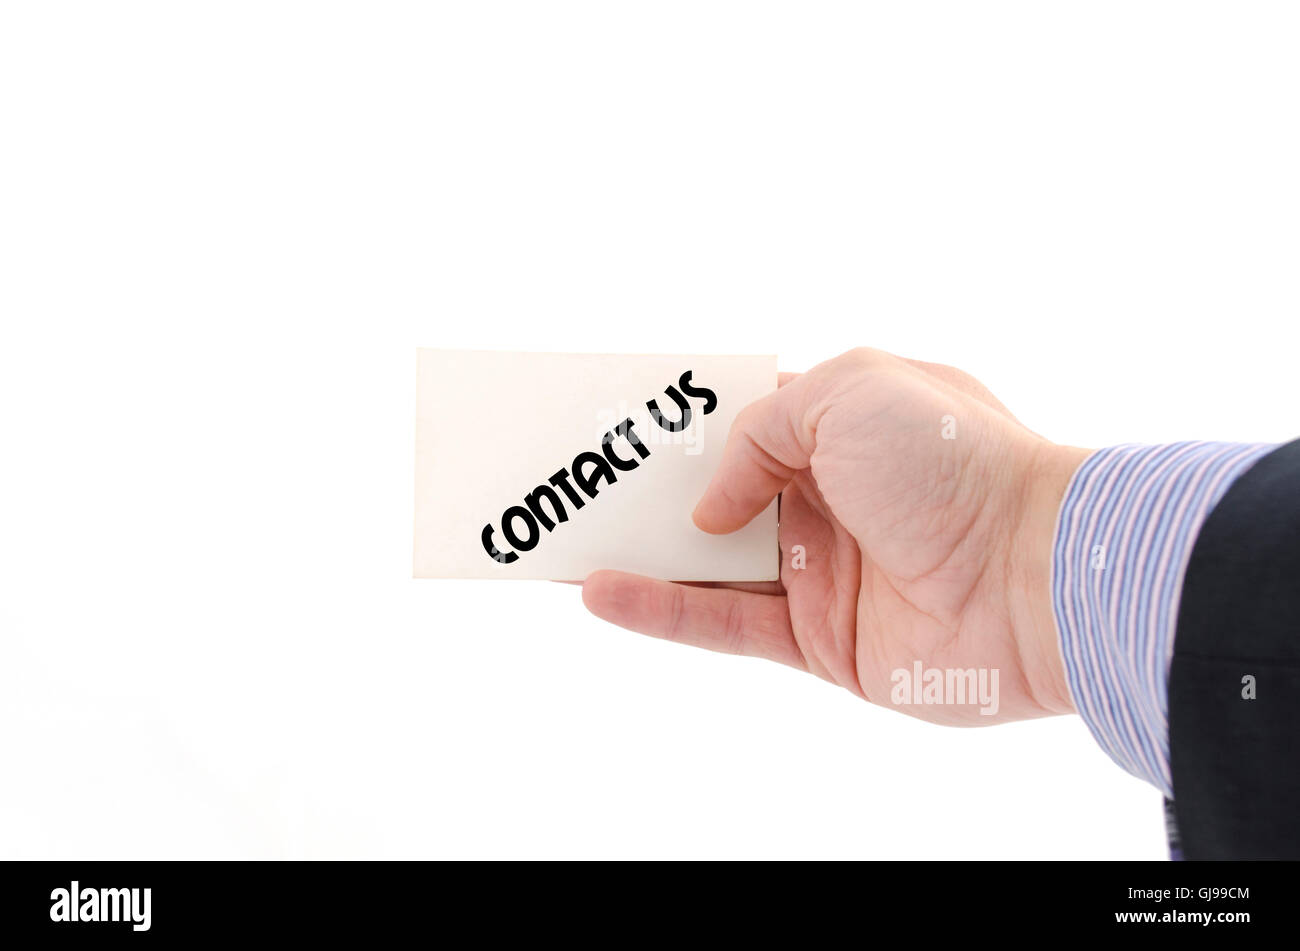 Contact us text concept isolated over white background Stock Photo